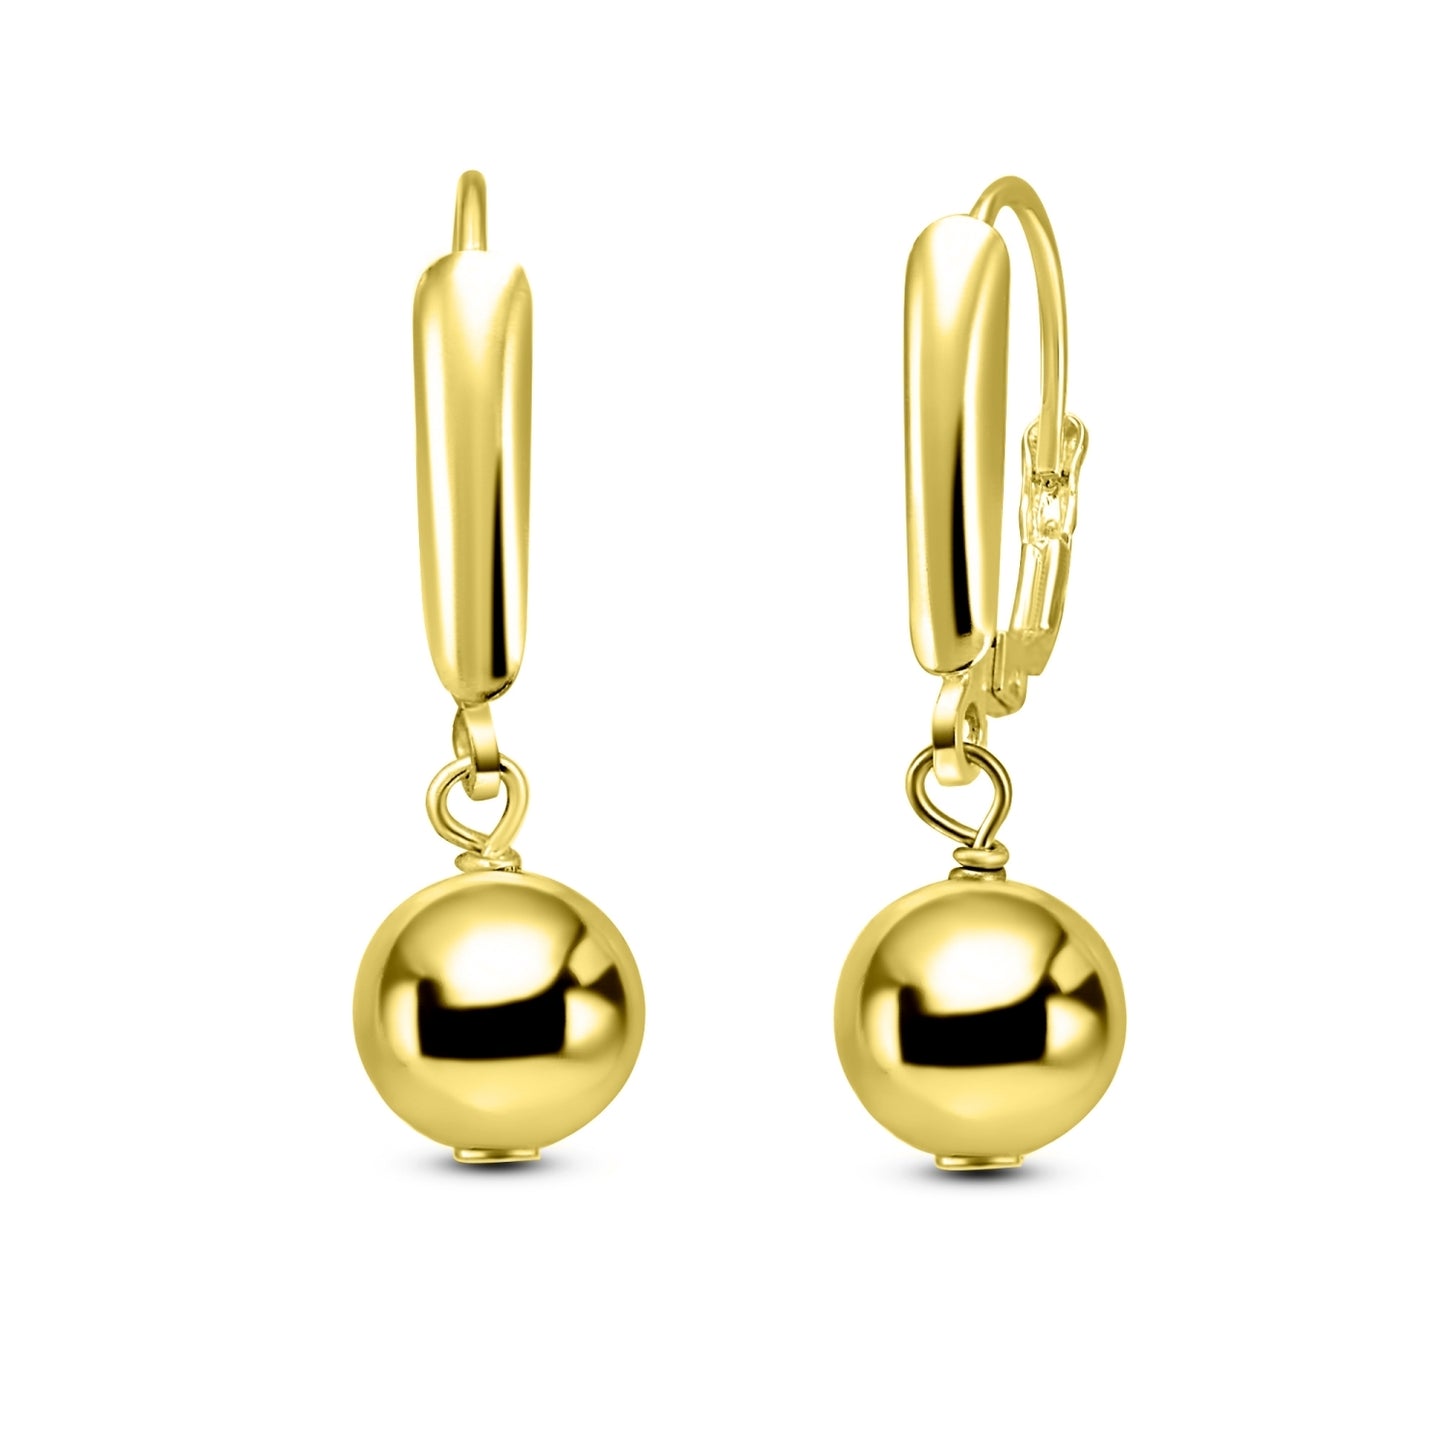 Gold Earrings for Women Girls Trendy Yellow Flashed Sterling Silver 8mm Polished Ball Bead Leverback Drop Gold Dangle Earrings Fashion